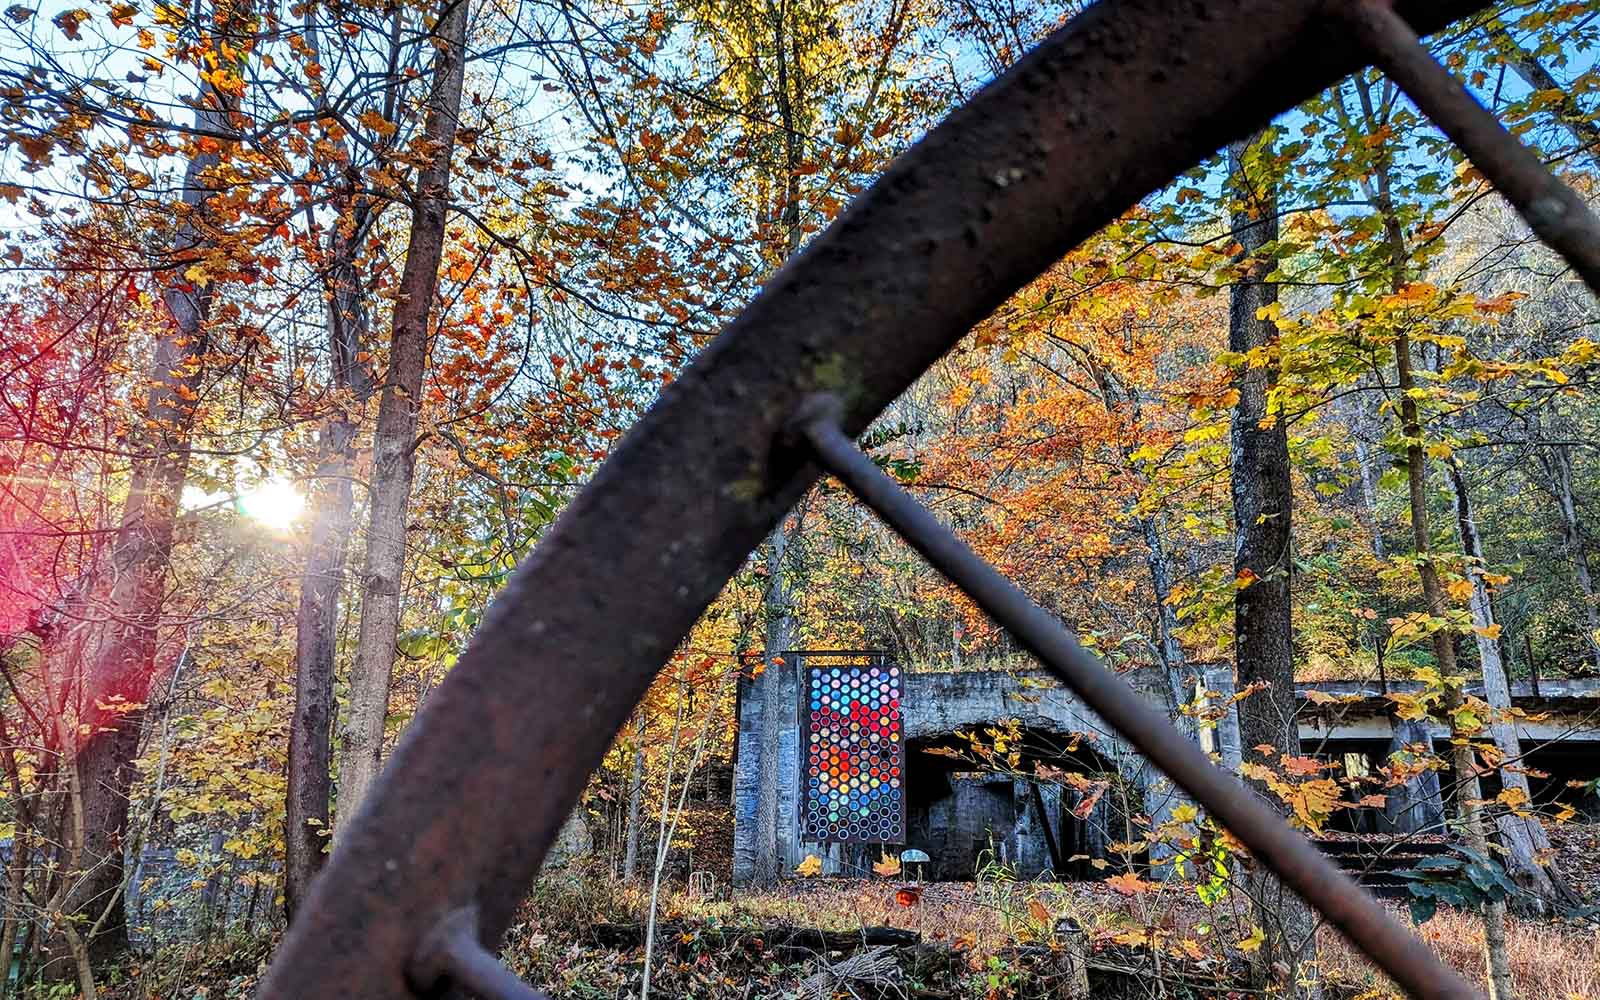 A rusting metal wheel crisscrosses the image revealing mosaic artwork in a fall landscape, viewable through its spokes.